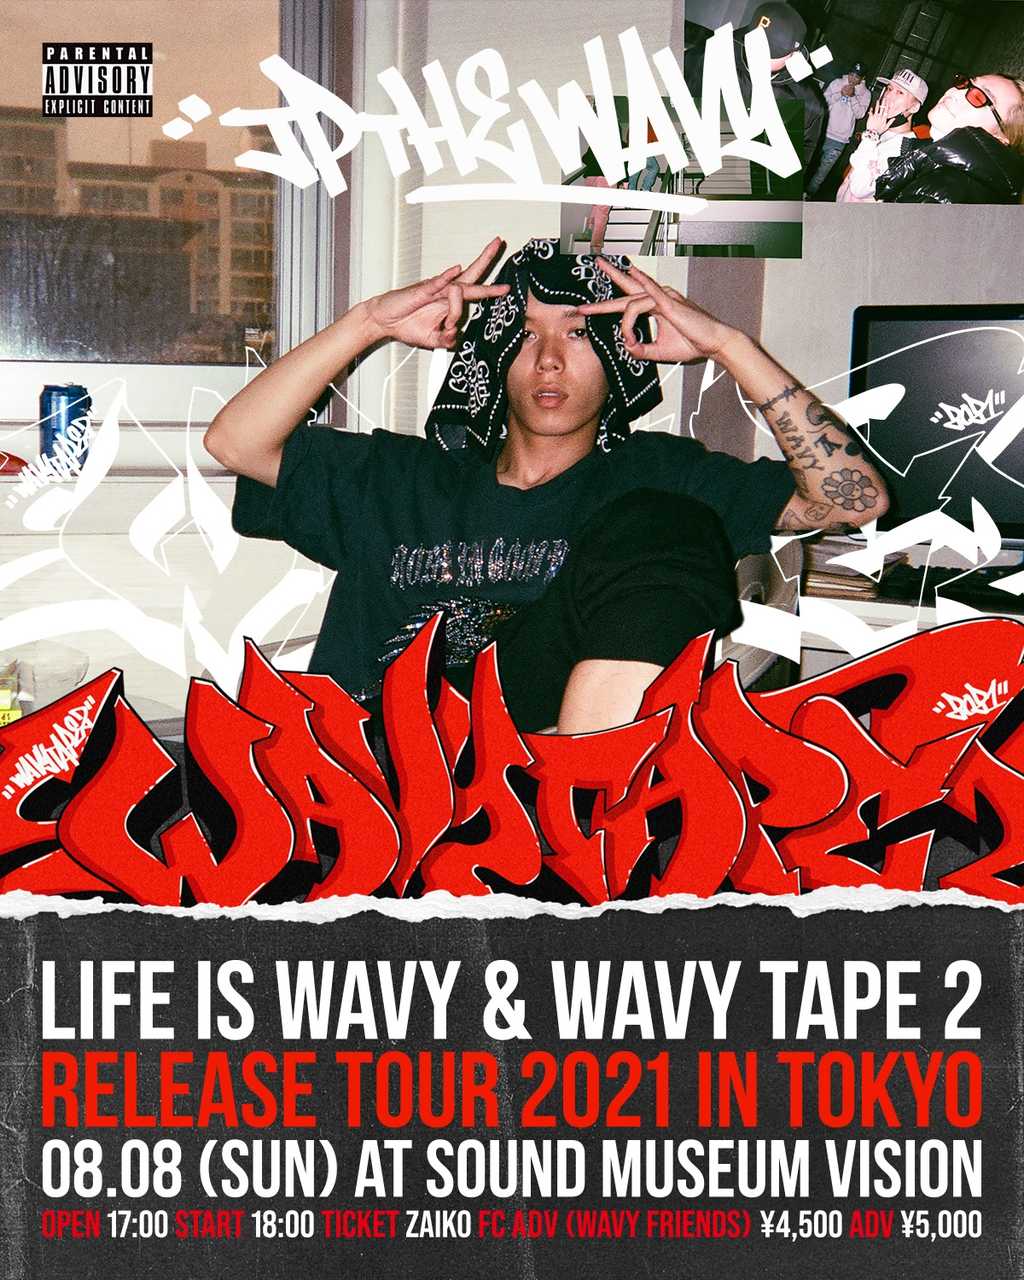 『LIFE IS WAVY & WAVY TAPE 2 RELEASE TOUR 2021 in TOKYO』